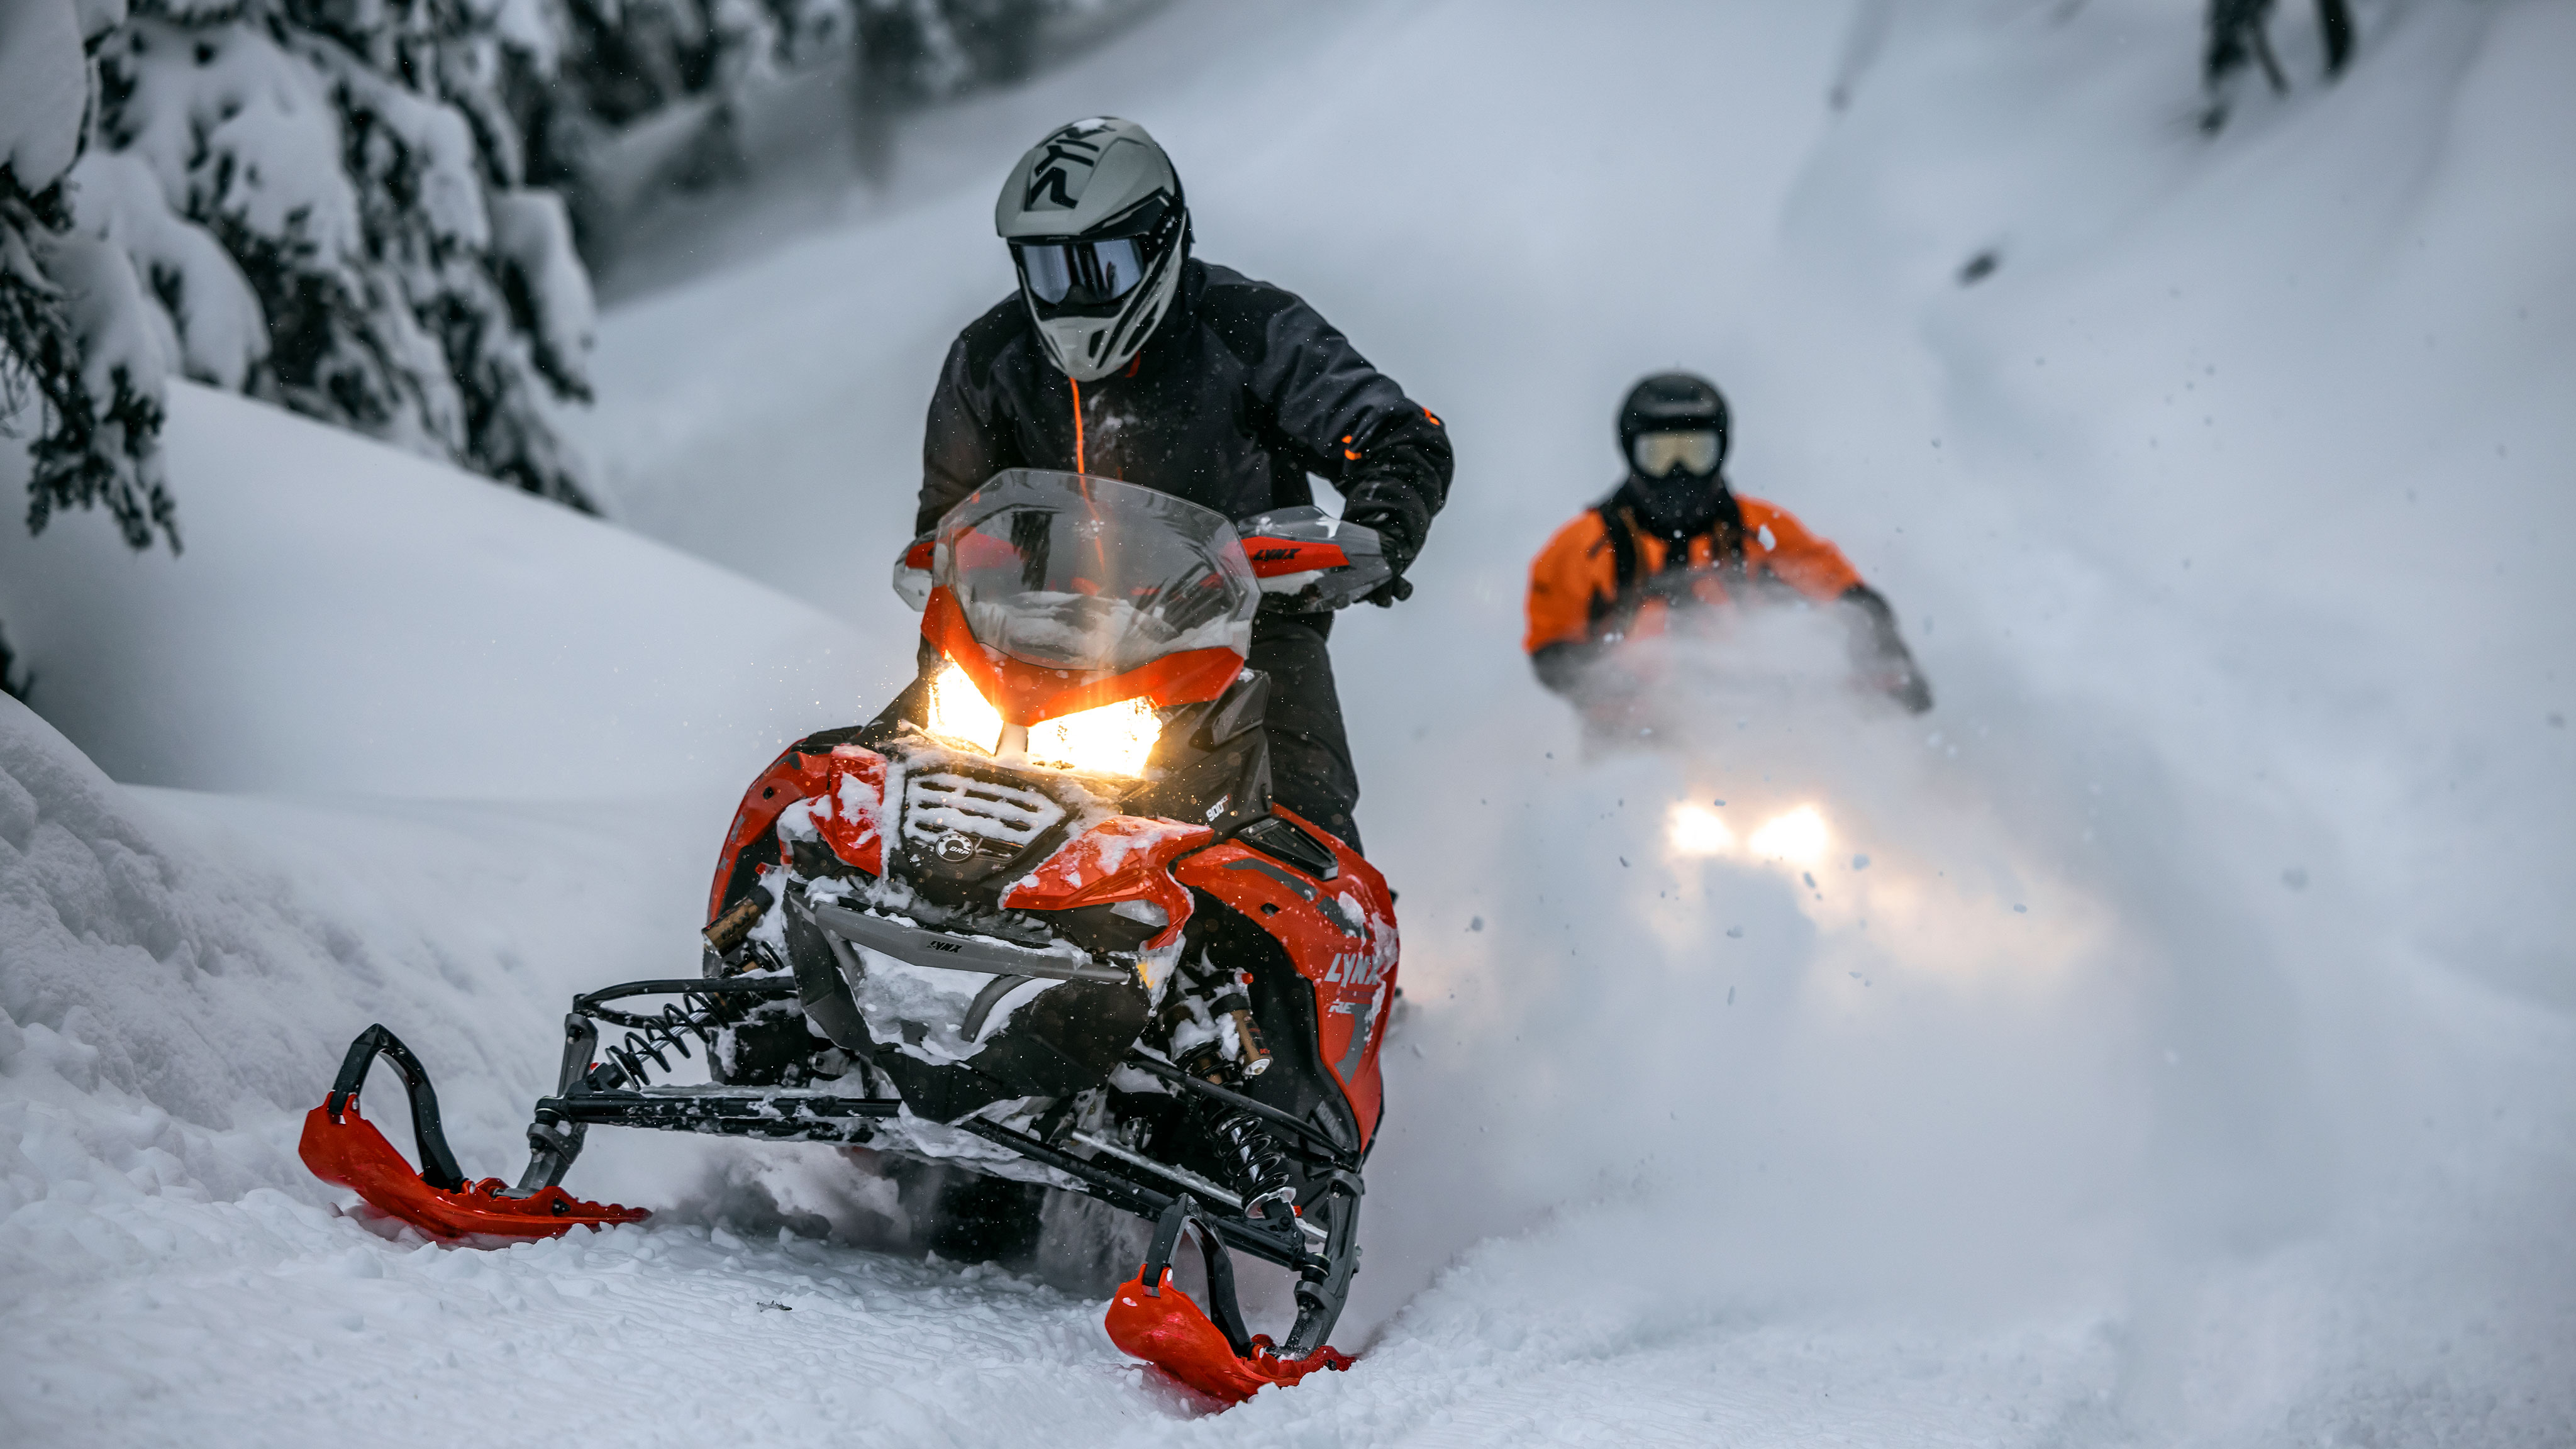 Two riders taking their Lynx snowmobile through a snowy forest